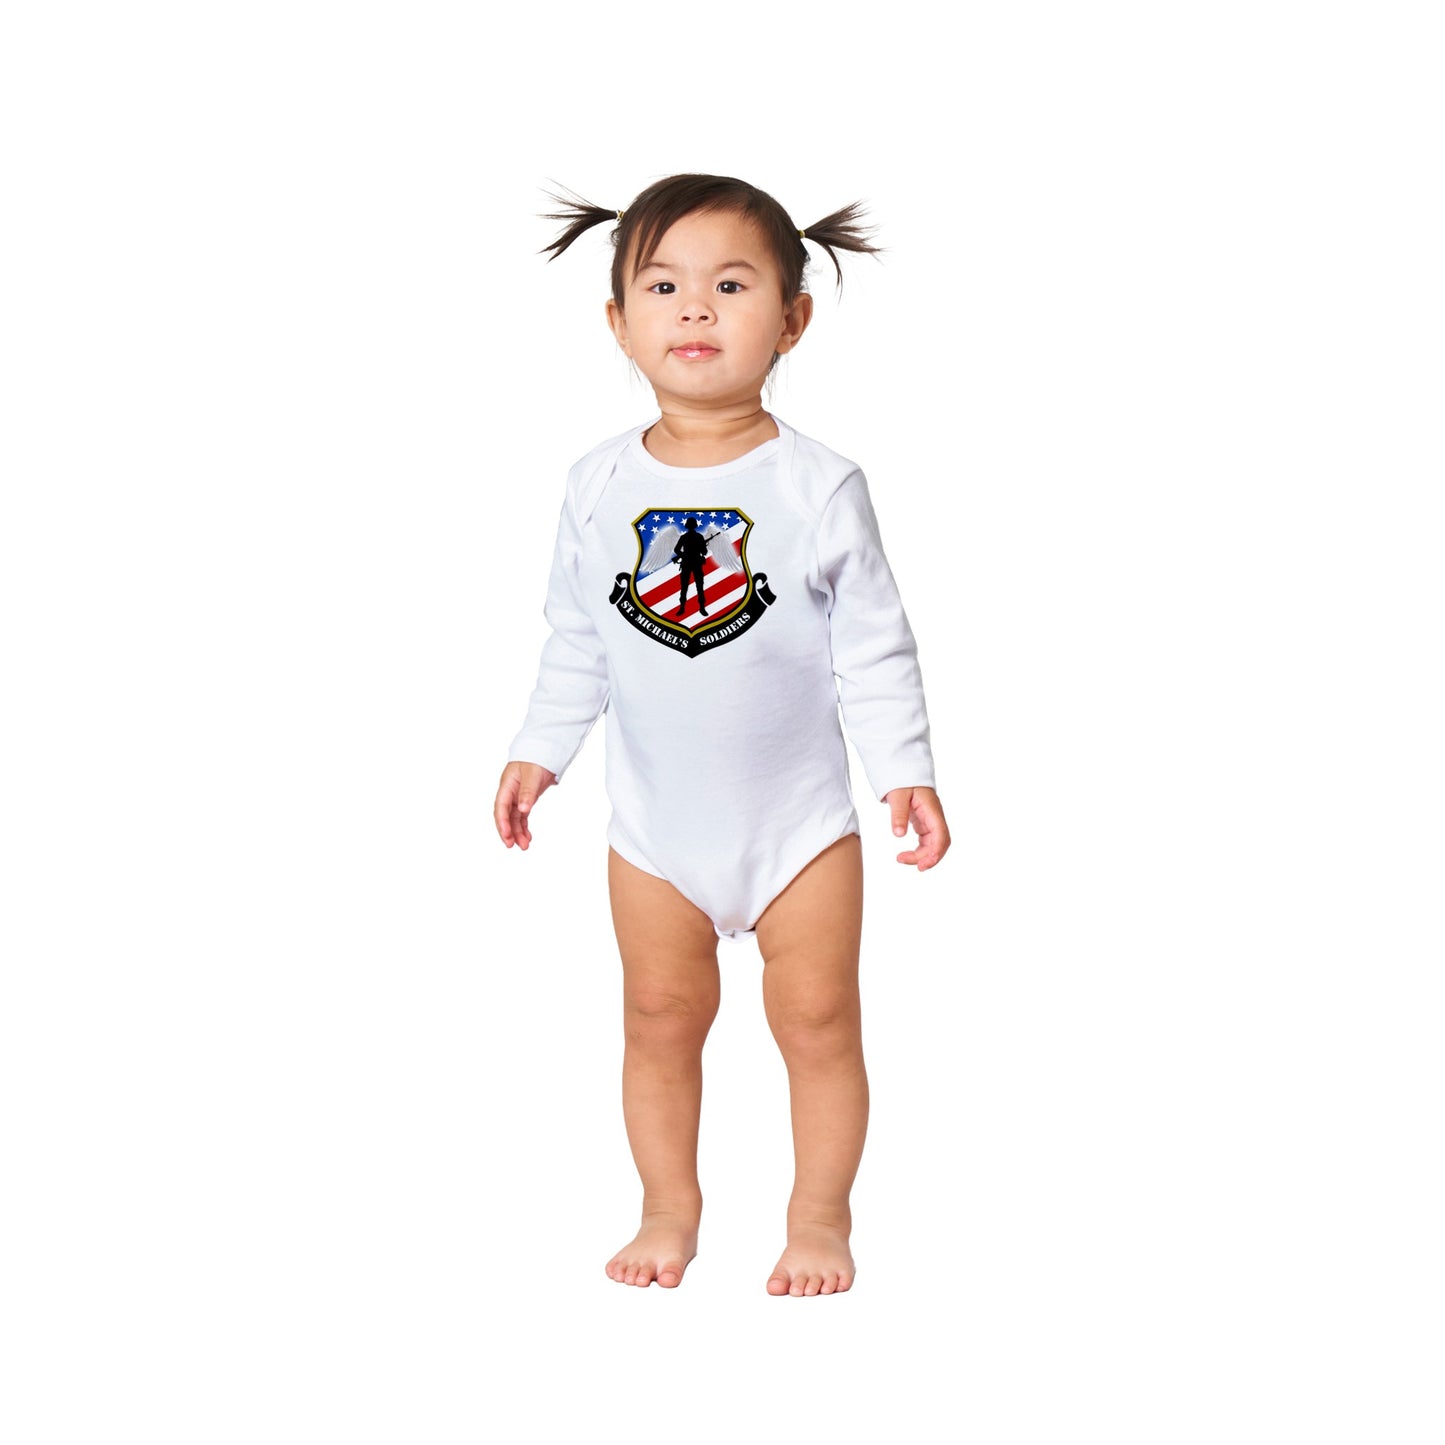 SMS Classic Baby Long Sleeve Bodysuit